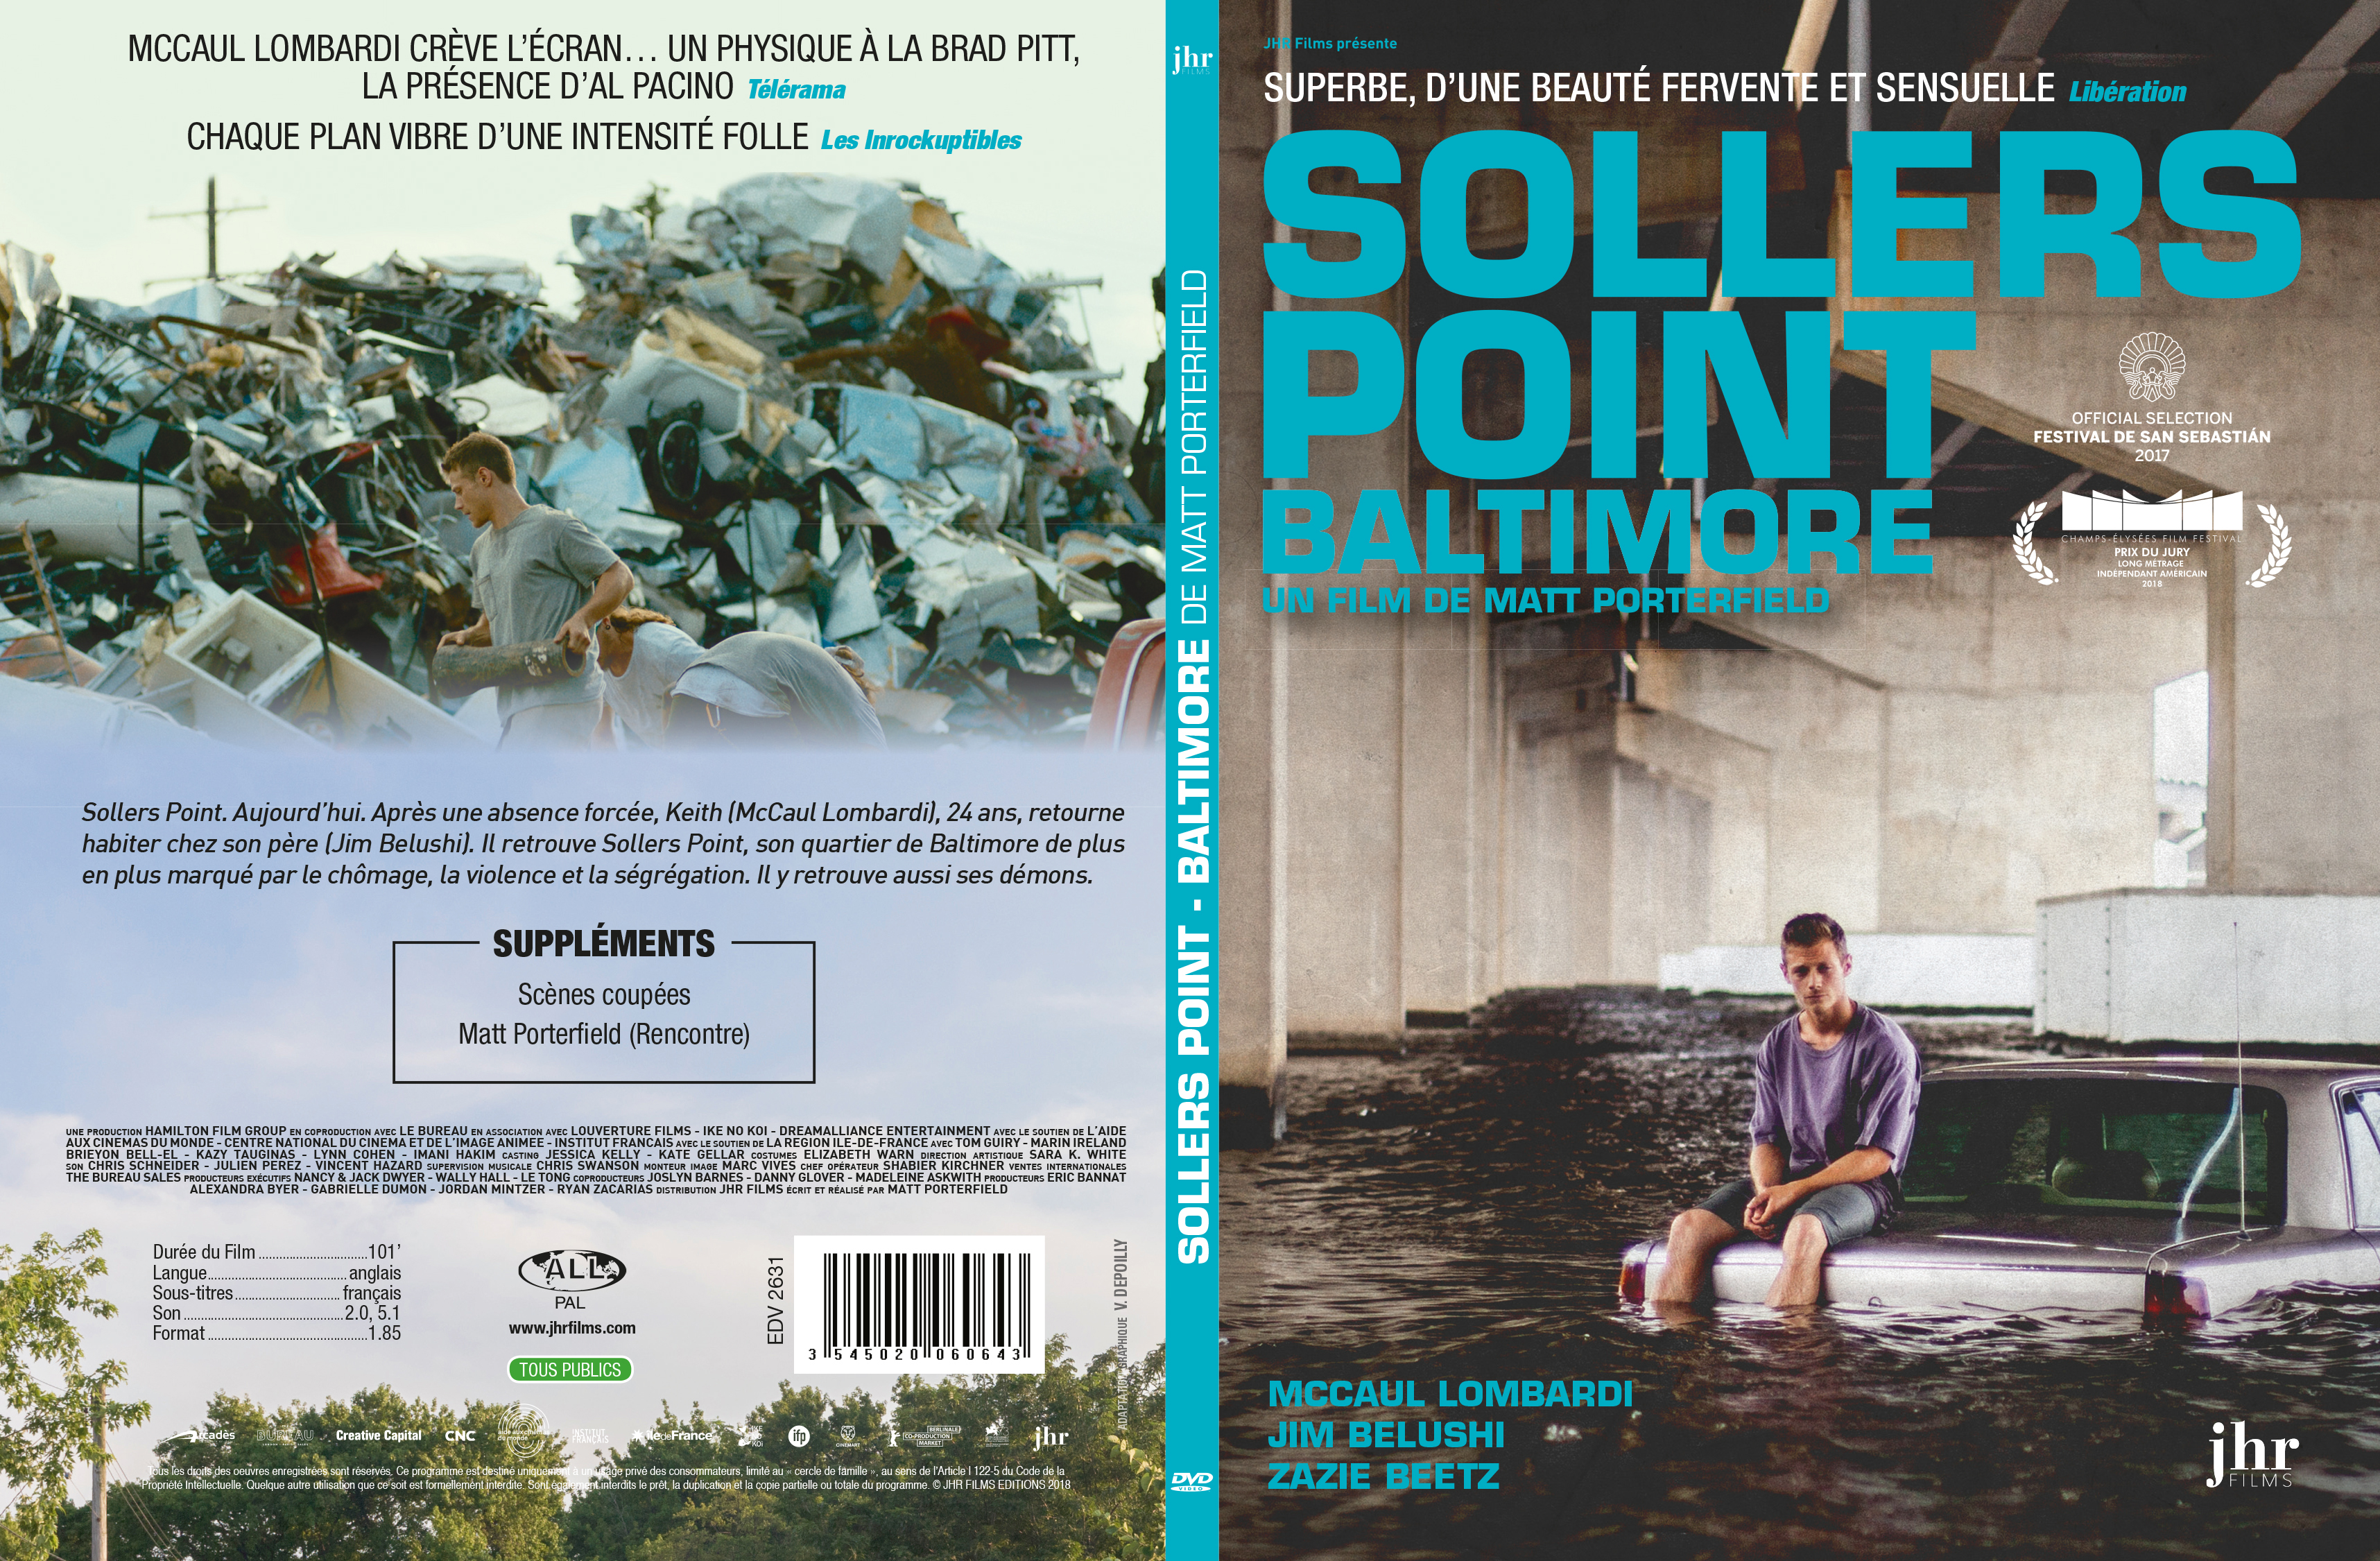 Jaquette DVD Sollers point Baltimore